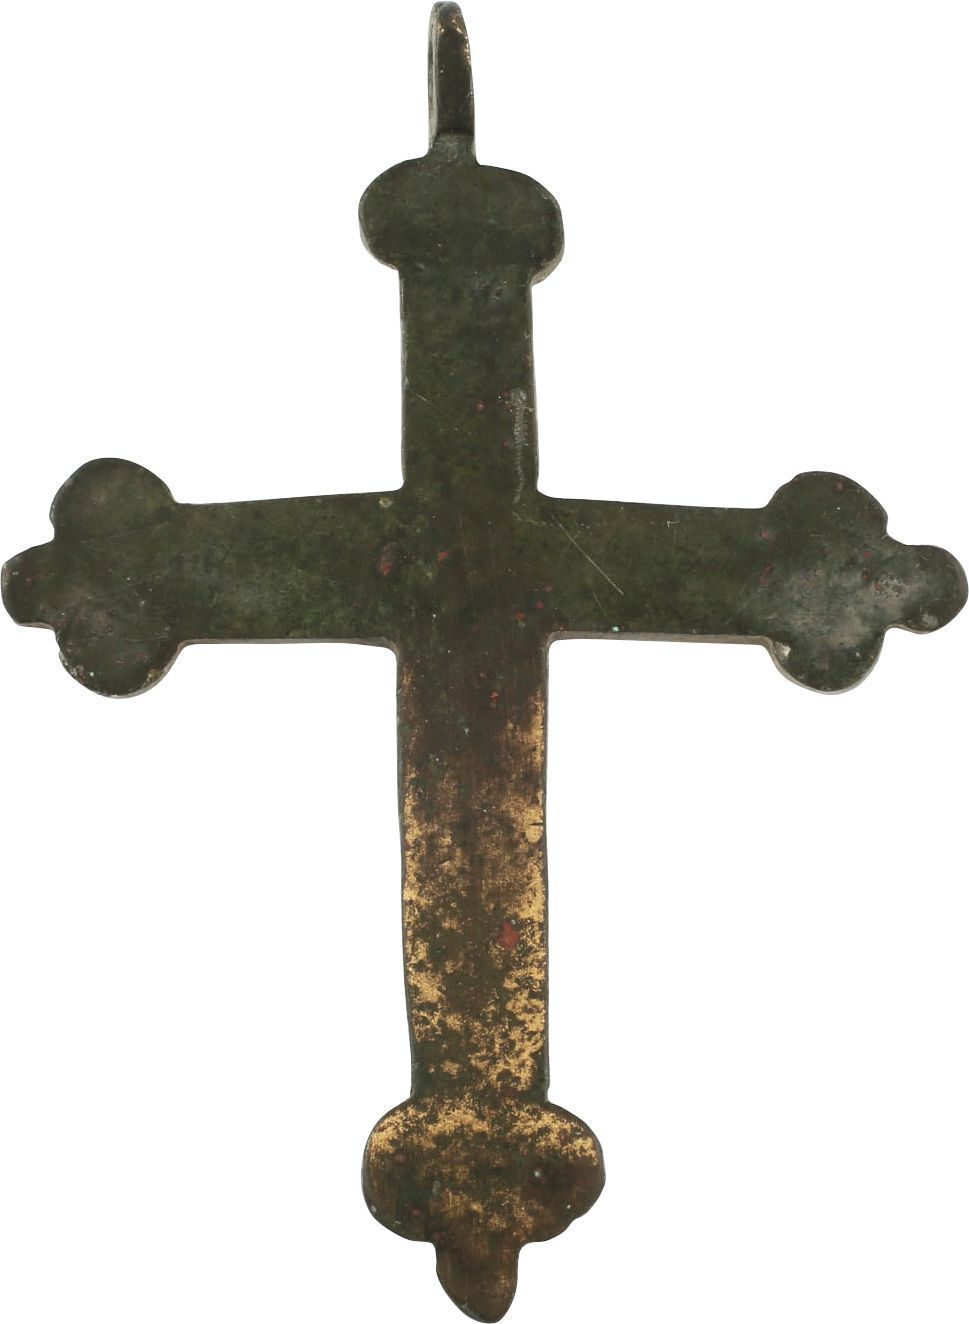 FINE AND RARE SPANISH MISSION CROSS - Fagan Arms